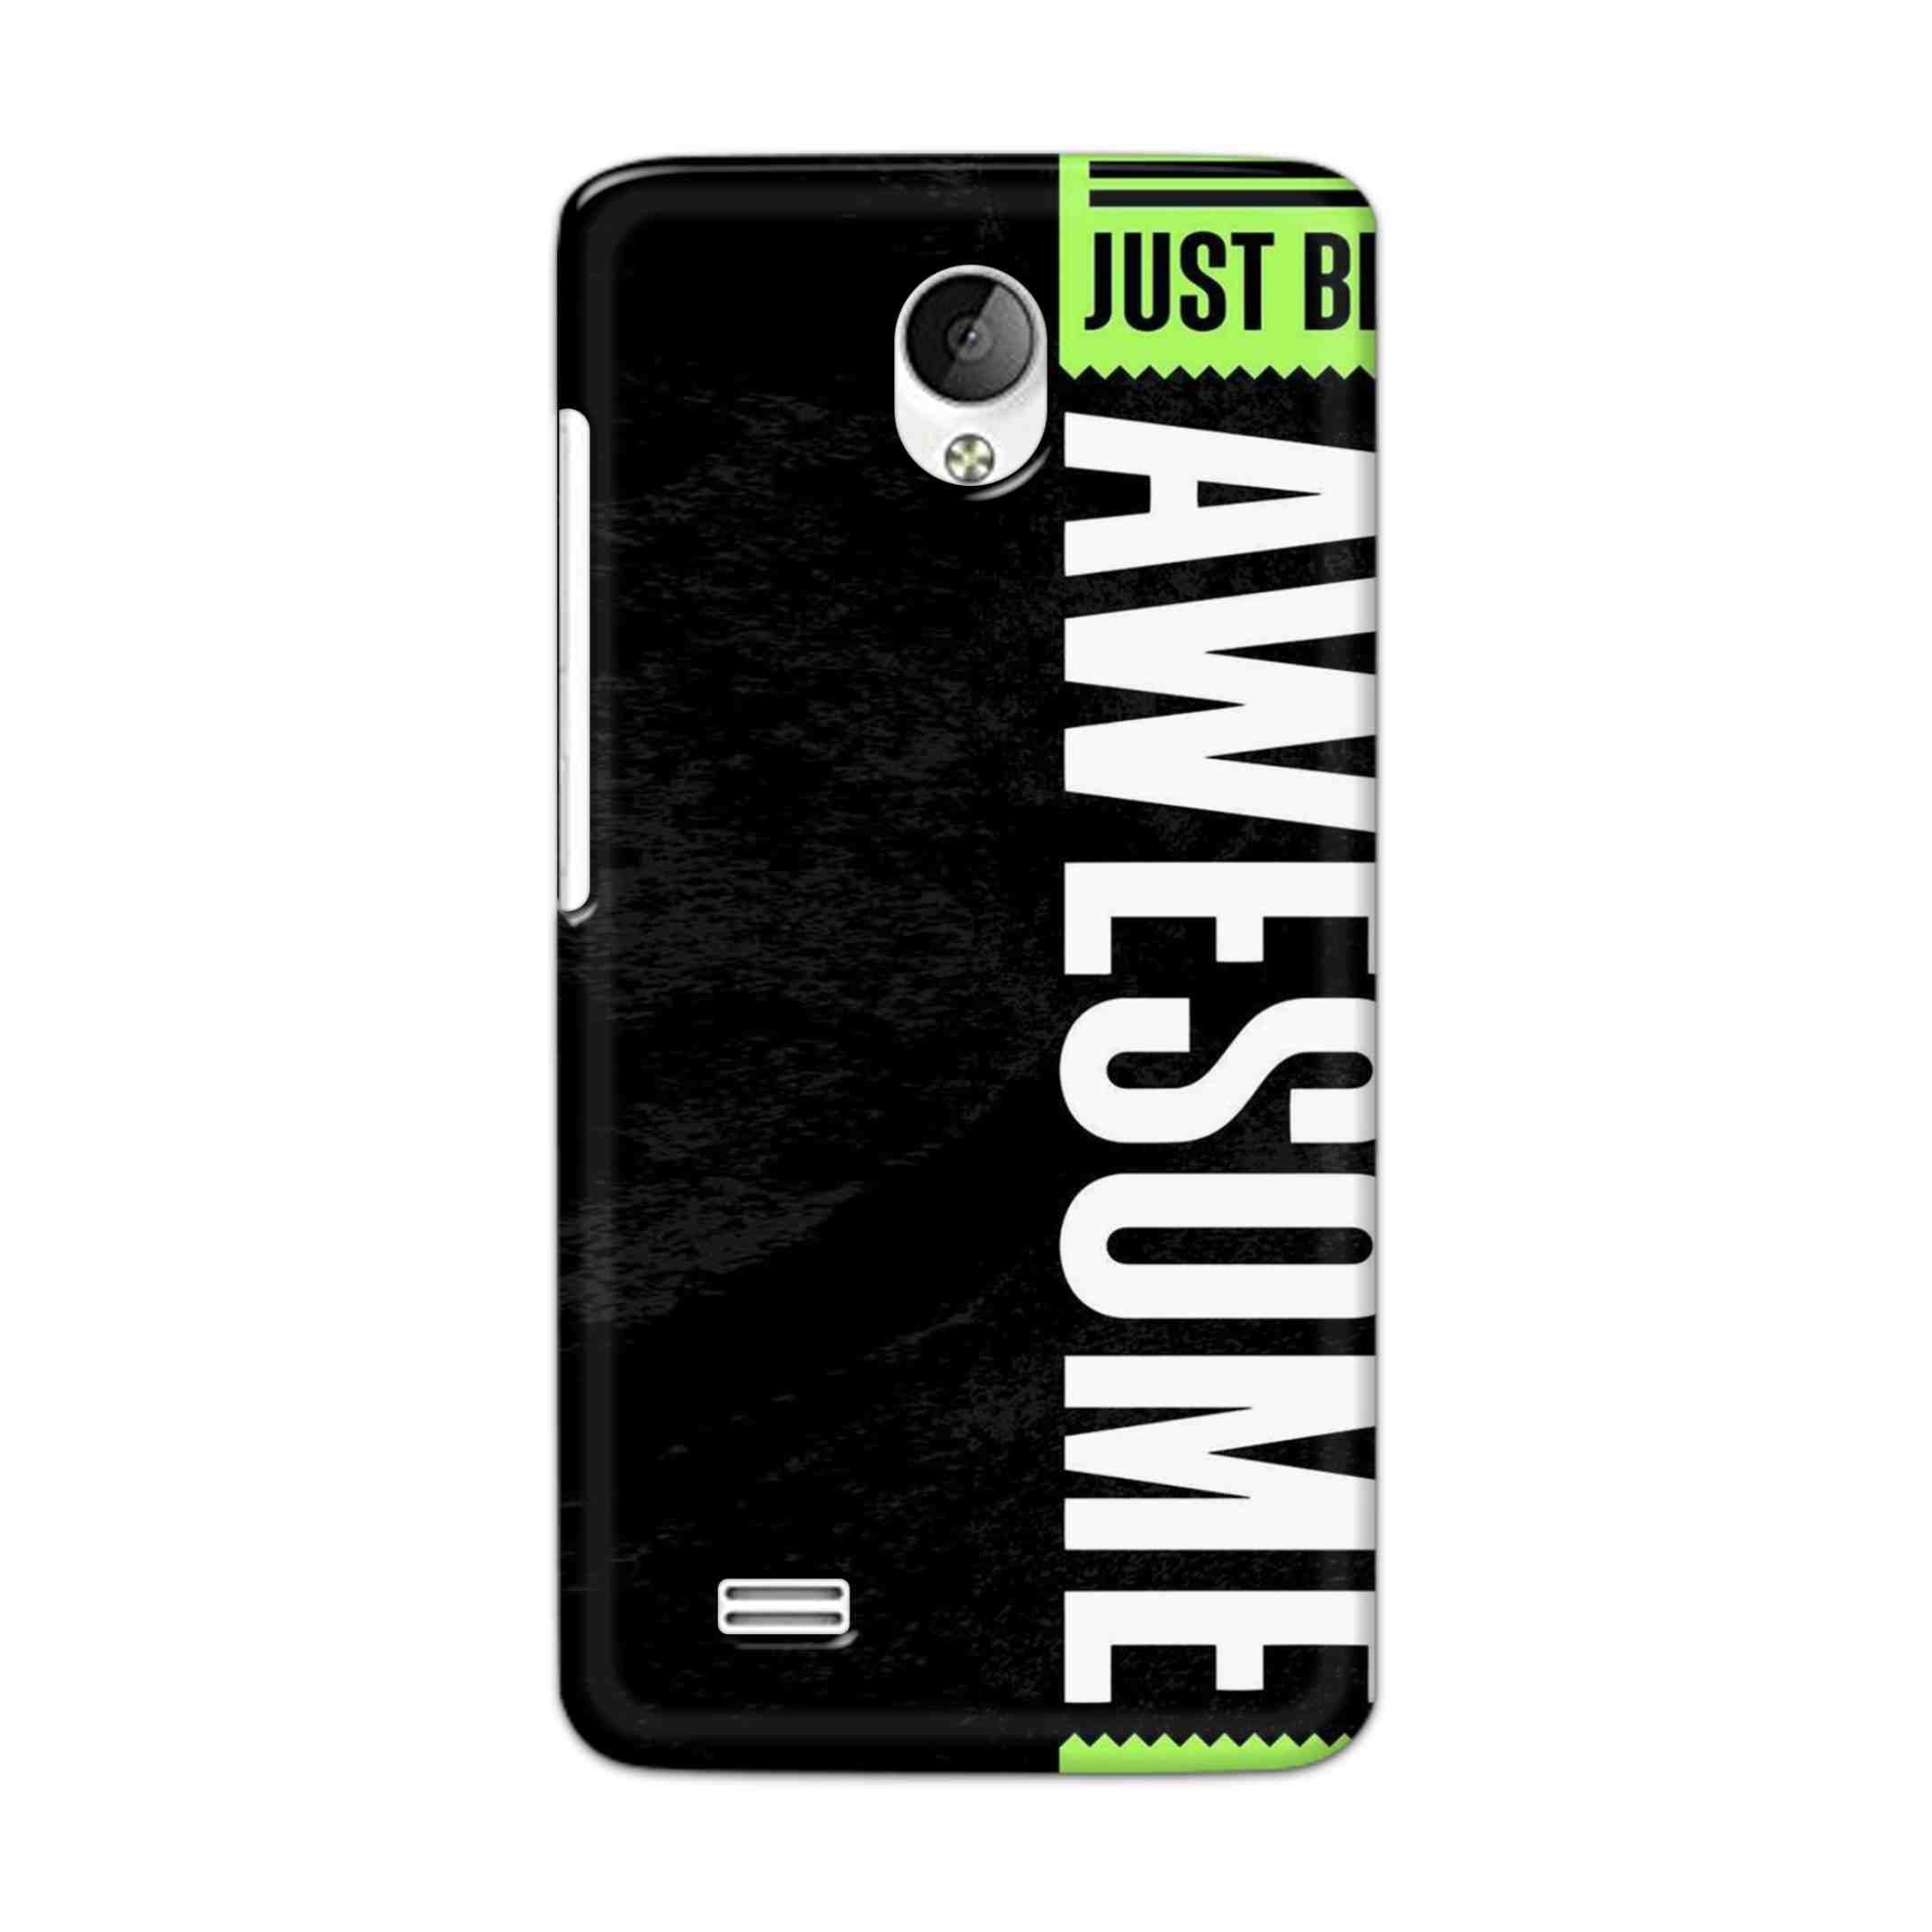 Buy Awesome Street Hard Back Mobile Phone Case Cover For Vivo Y21 / Vivo Y21L Online